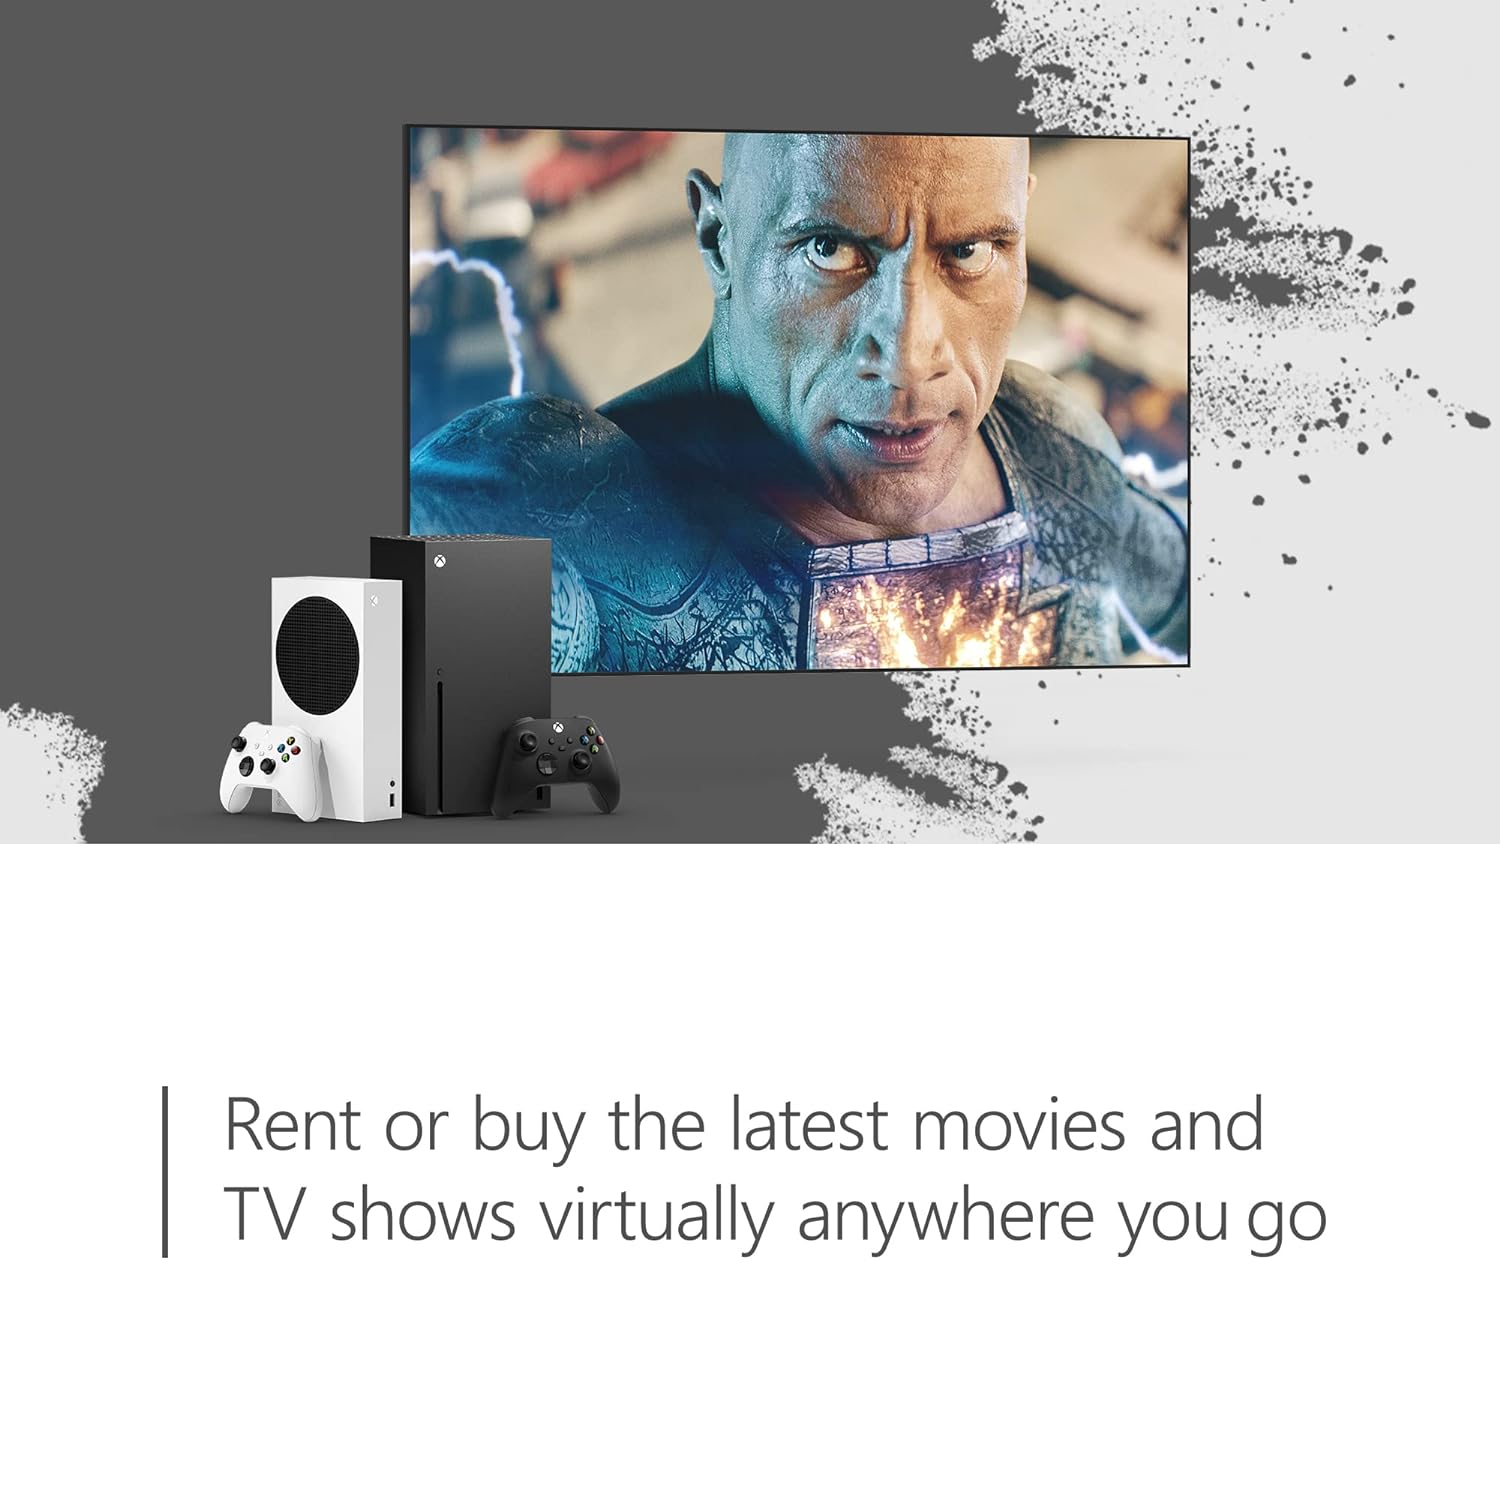 $25 Xbox Digital Gift Card | Rent or buy the latest movies and TV shows virtually anywhere you go.